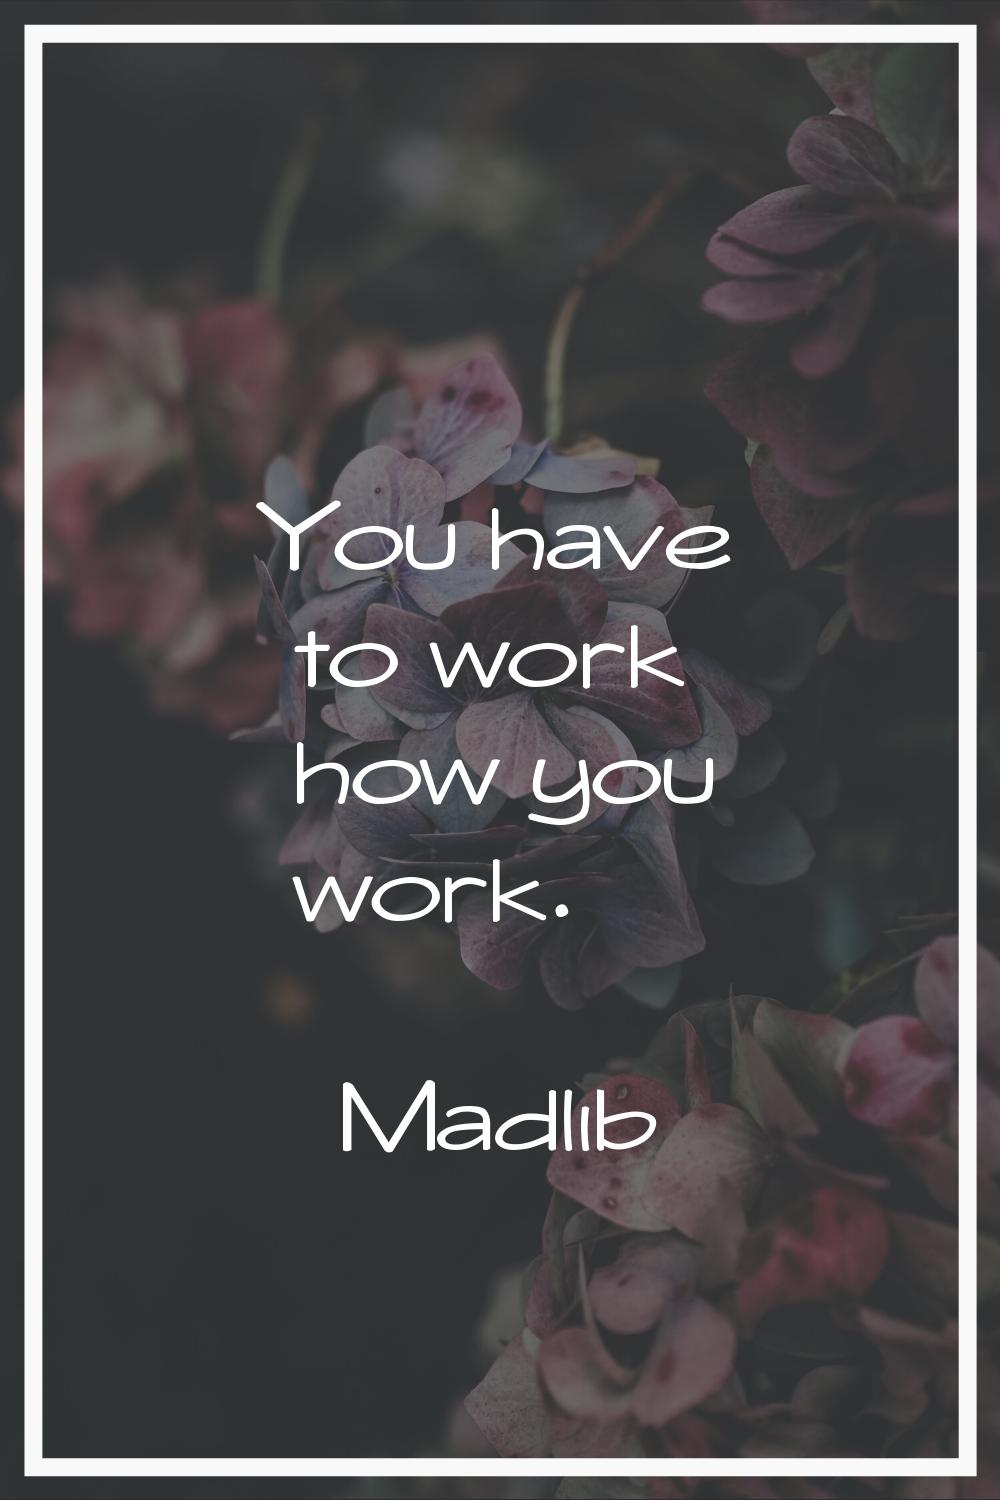 You have to work how you work.